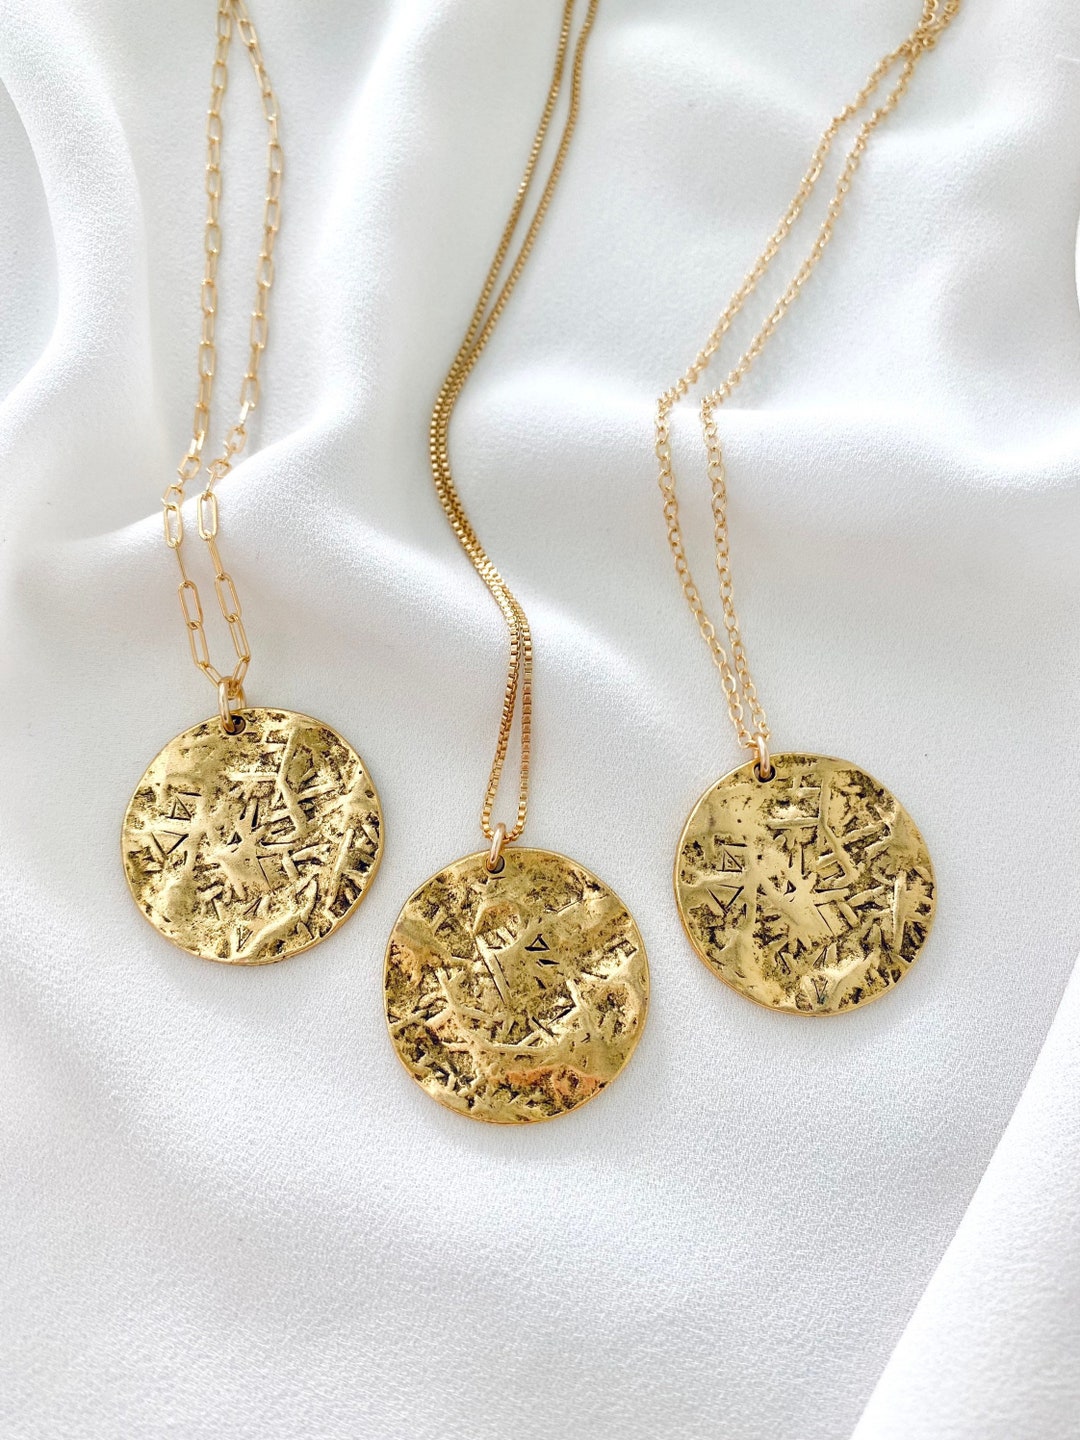 Textured Gold Medallion Necklace Hammered Coin Pendant - Etsy